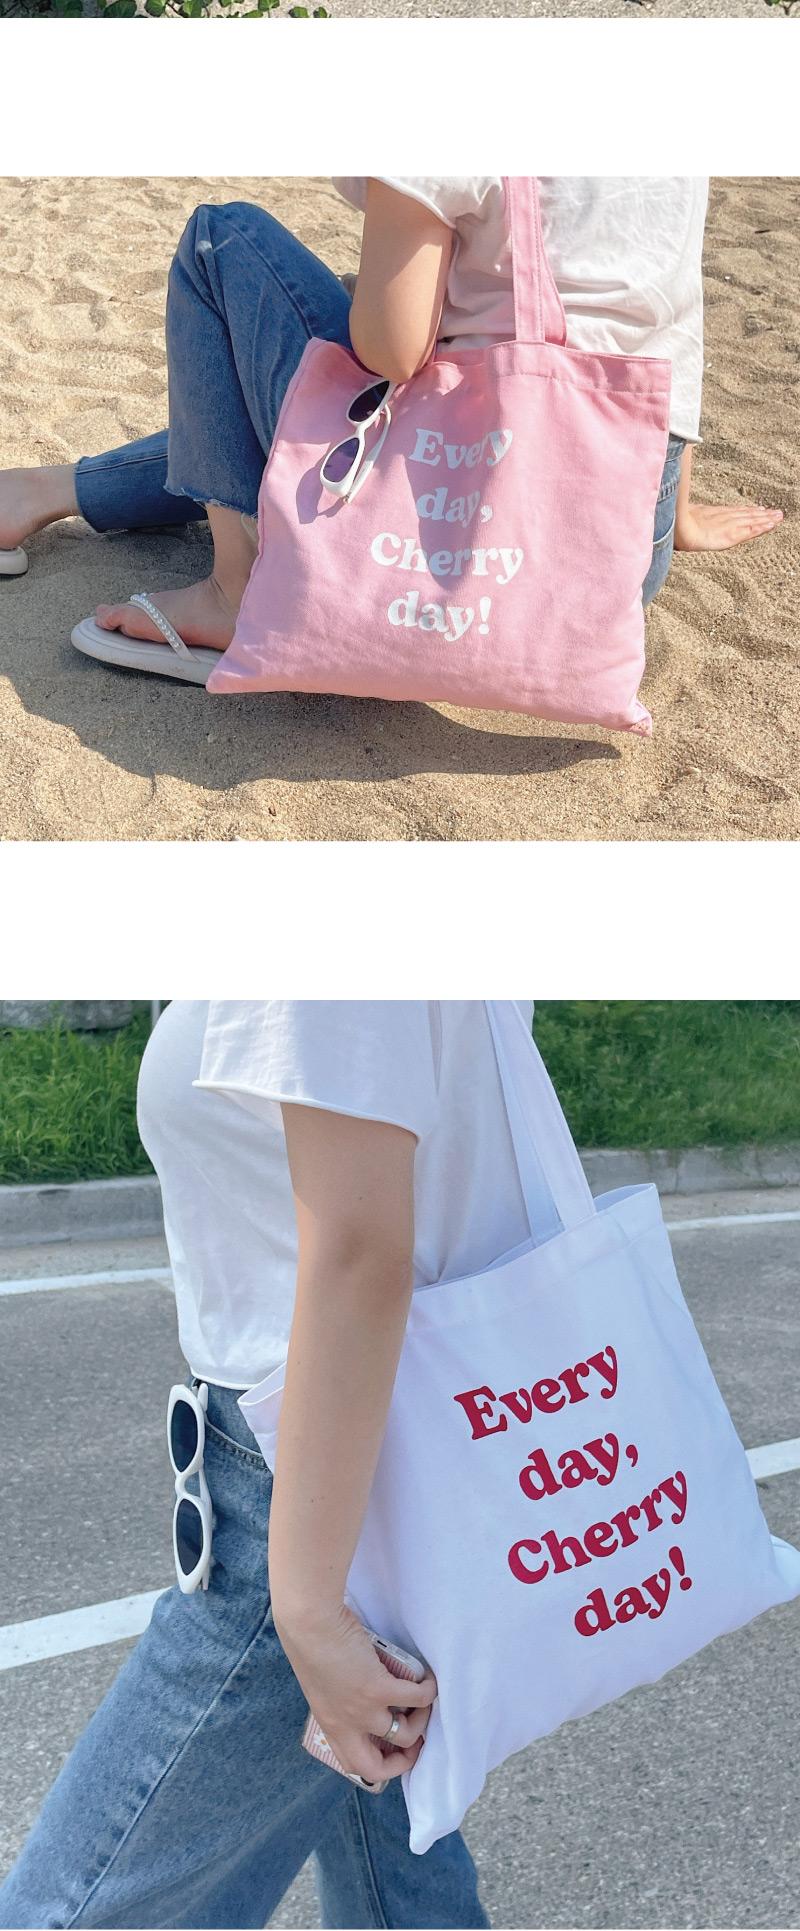 Cherry day Eco Bag (5colors)